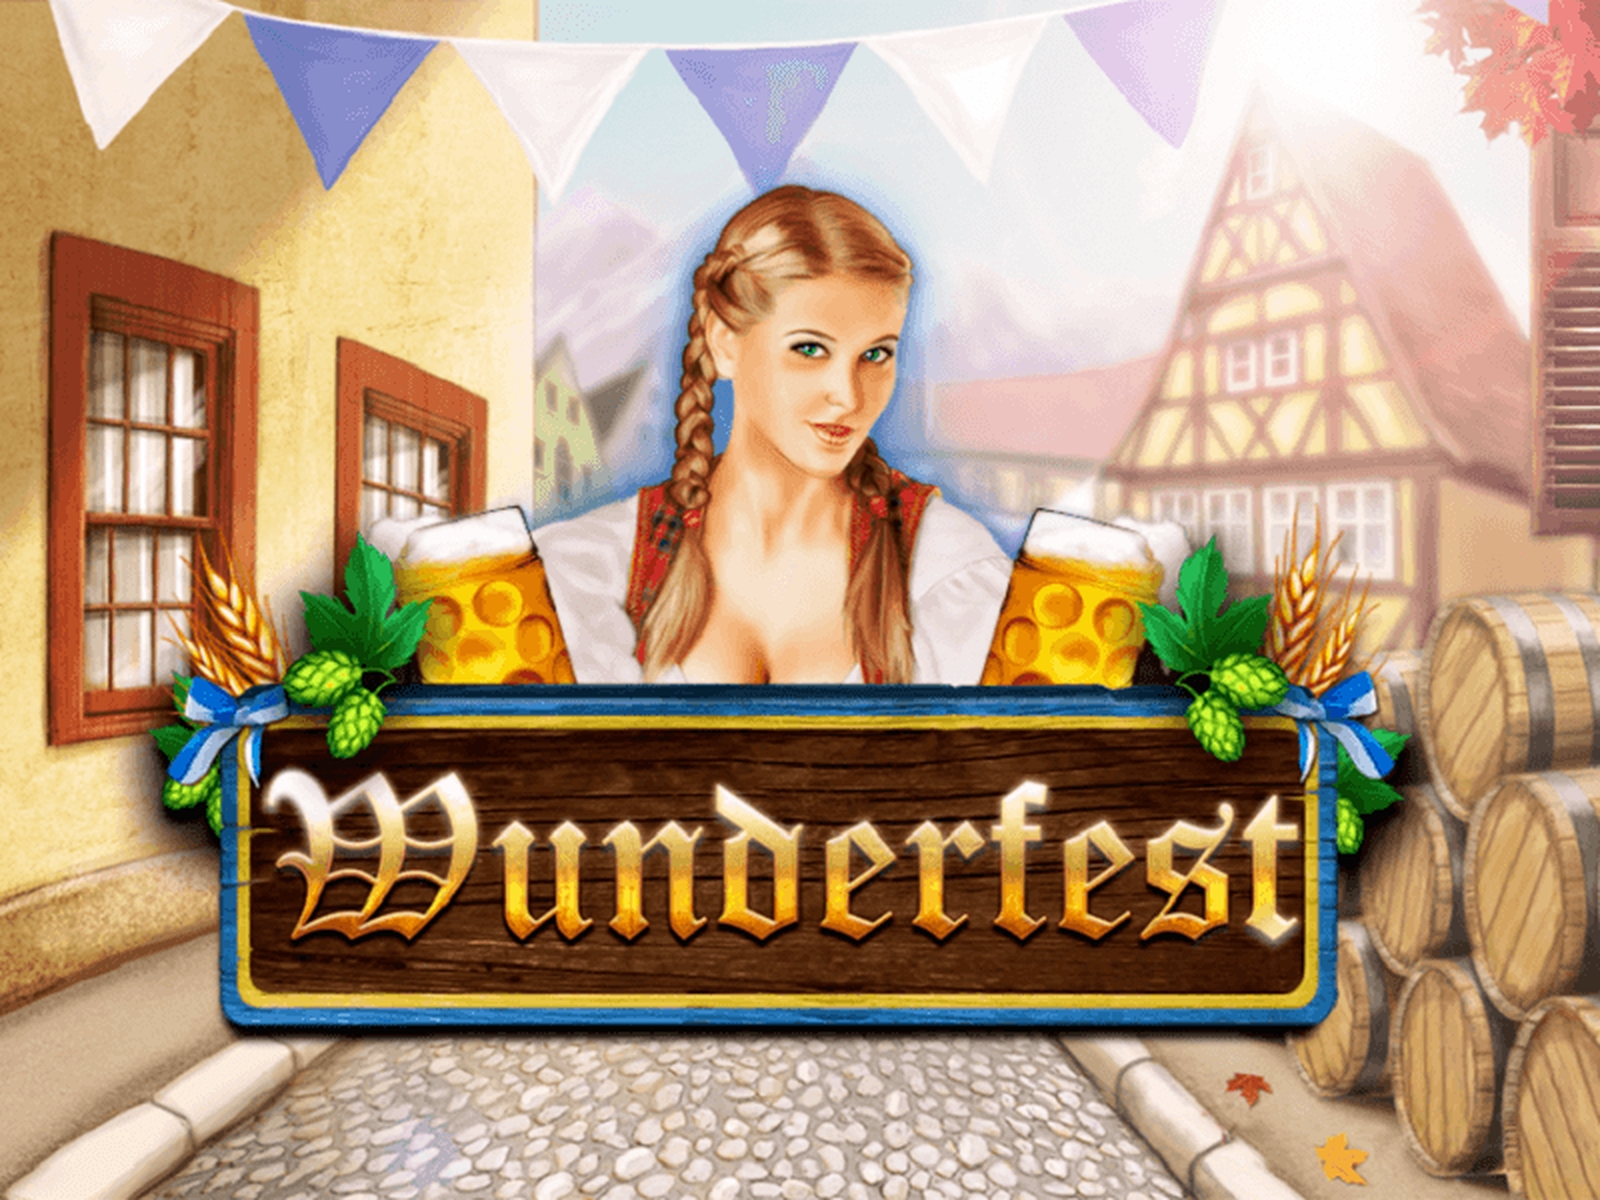 The Wunderfest Online Slot Demo Game by Booming Games